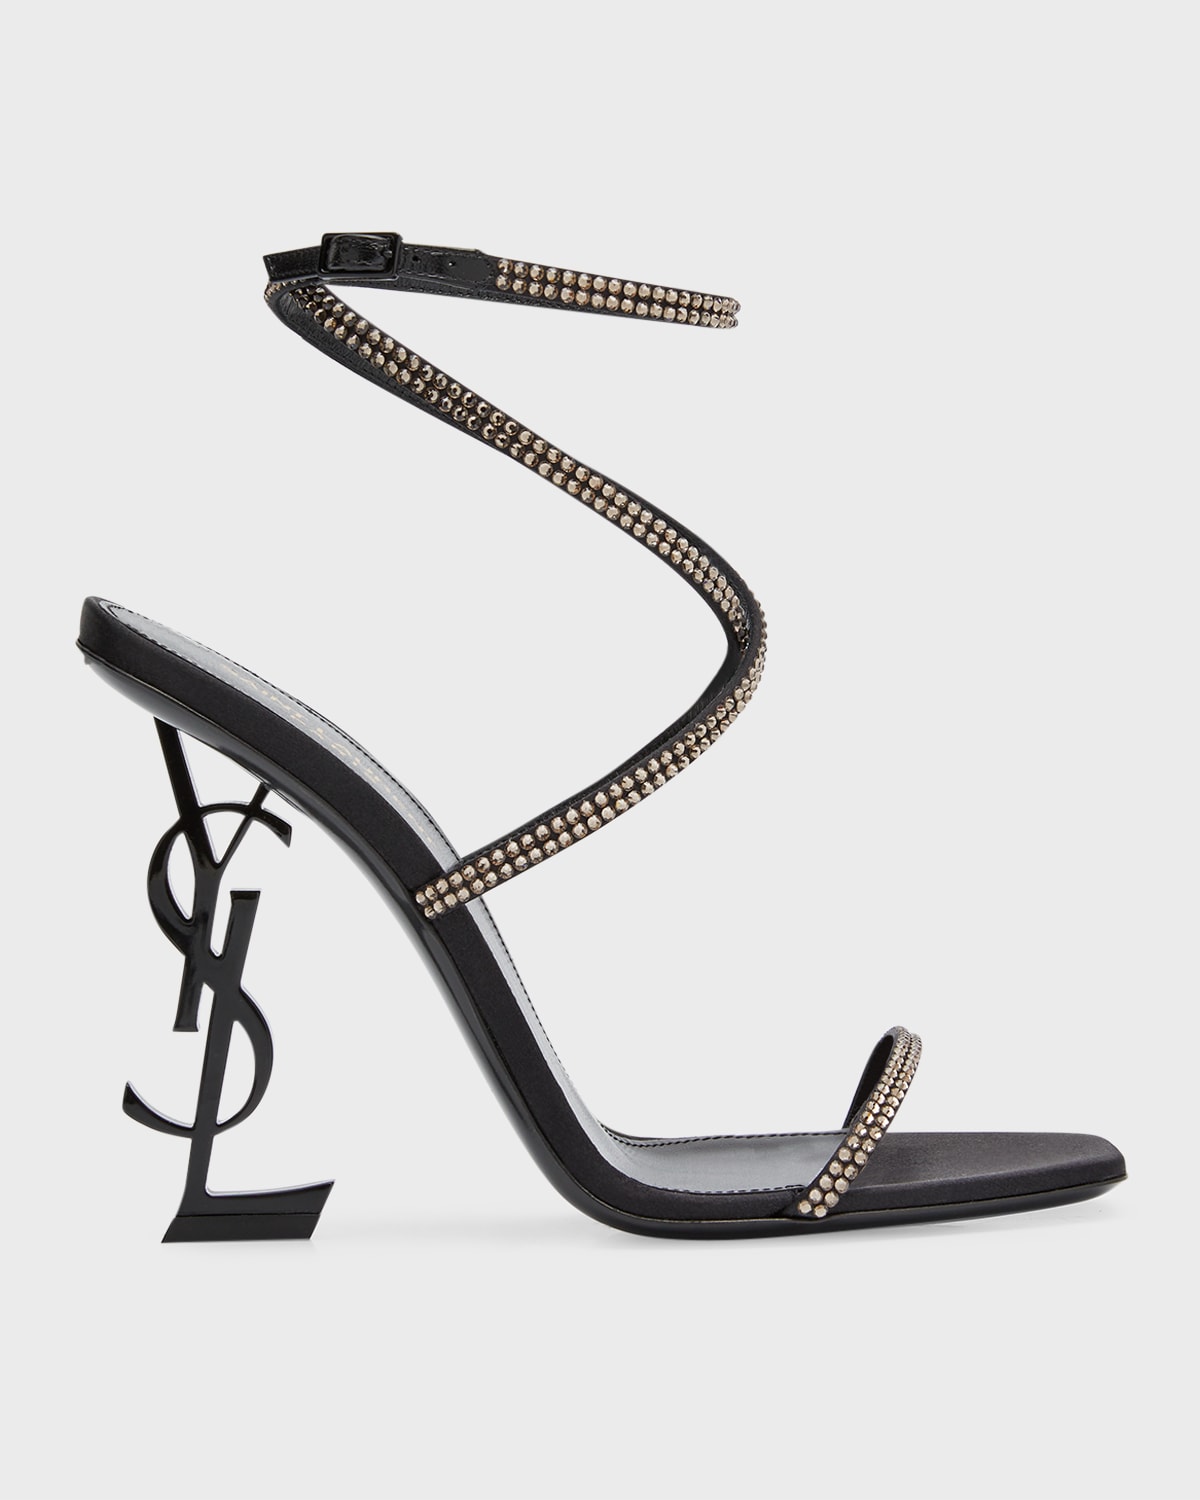 Opyum YSL Strass Ankle-Strap Sandals